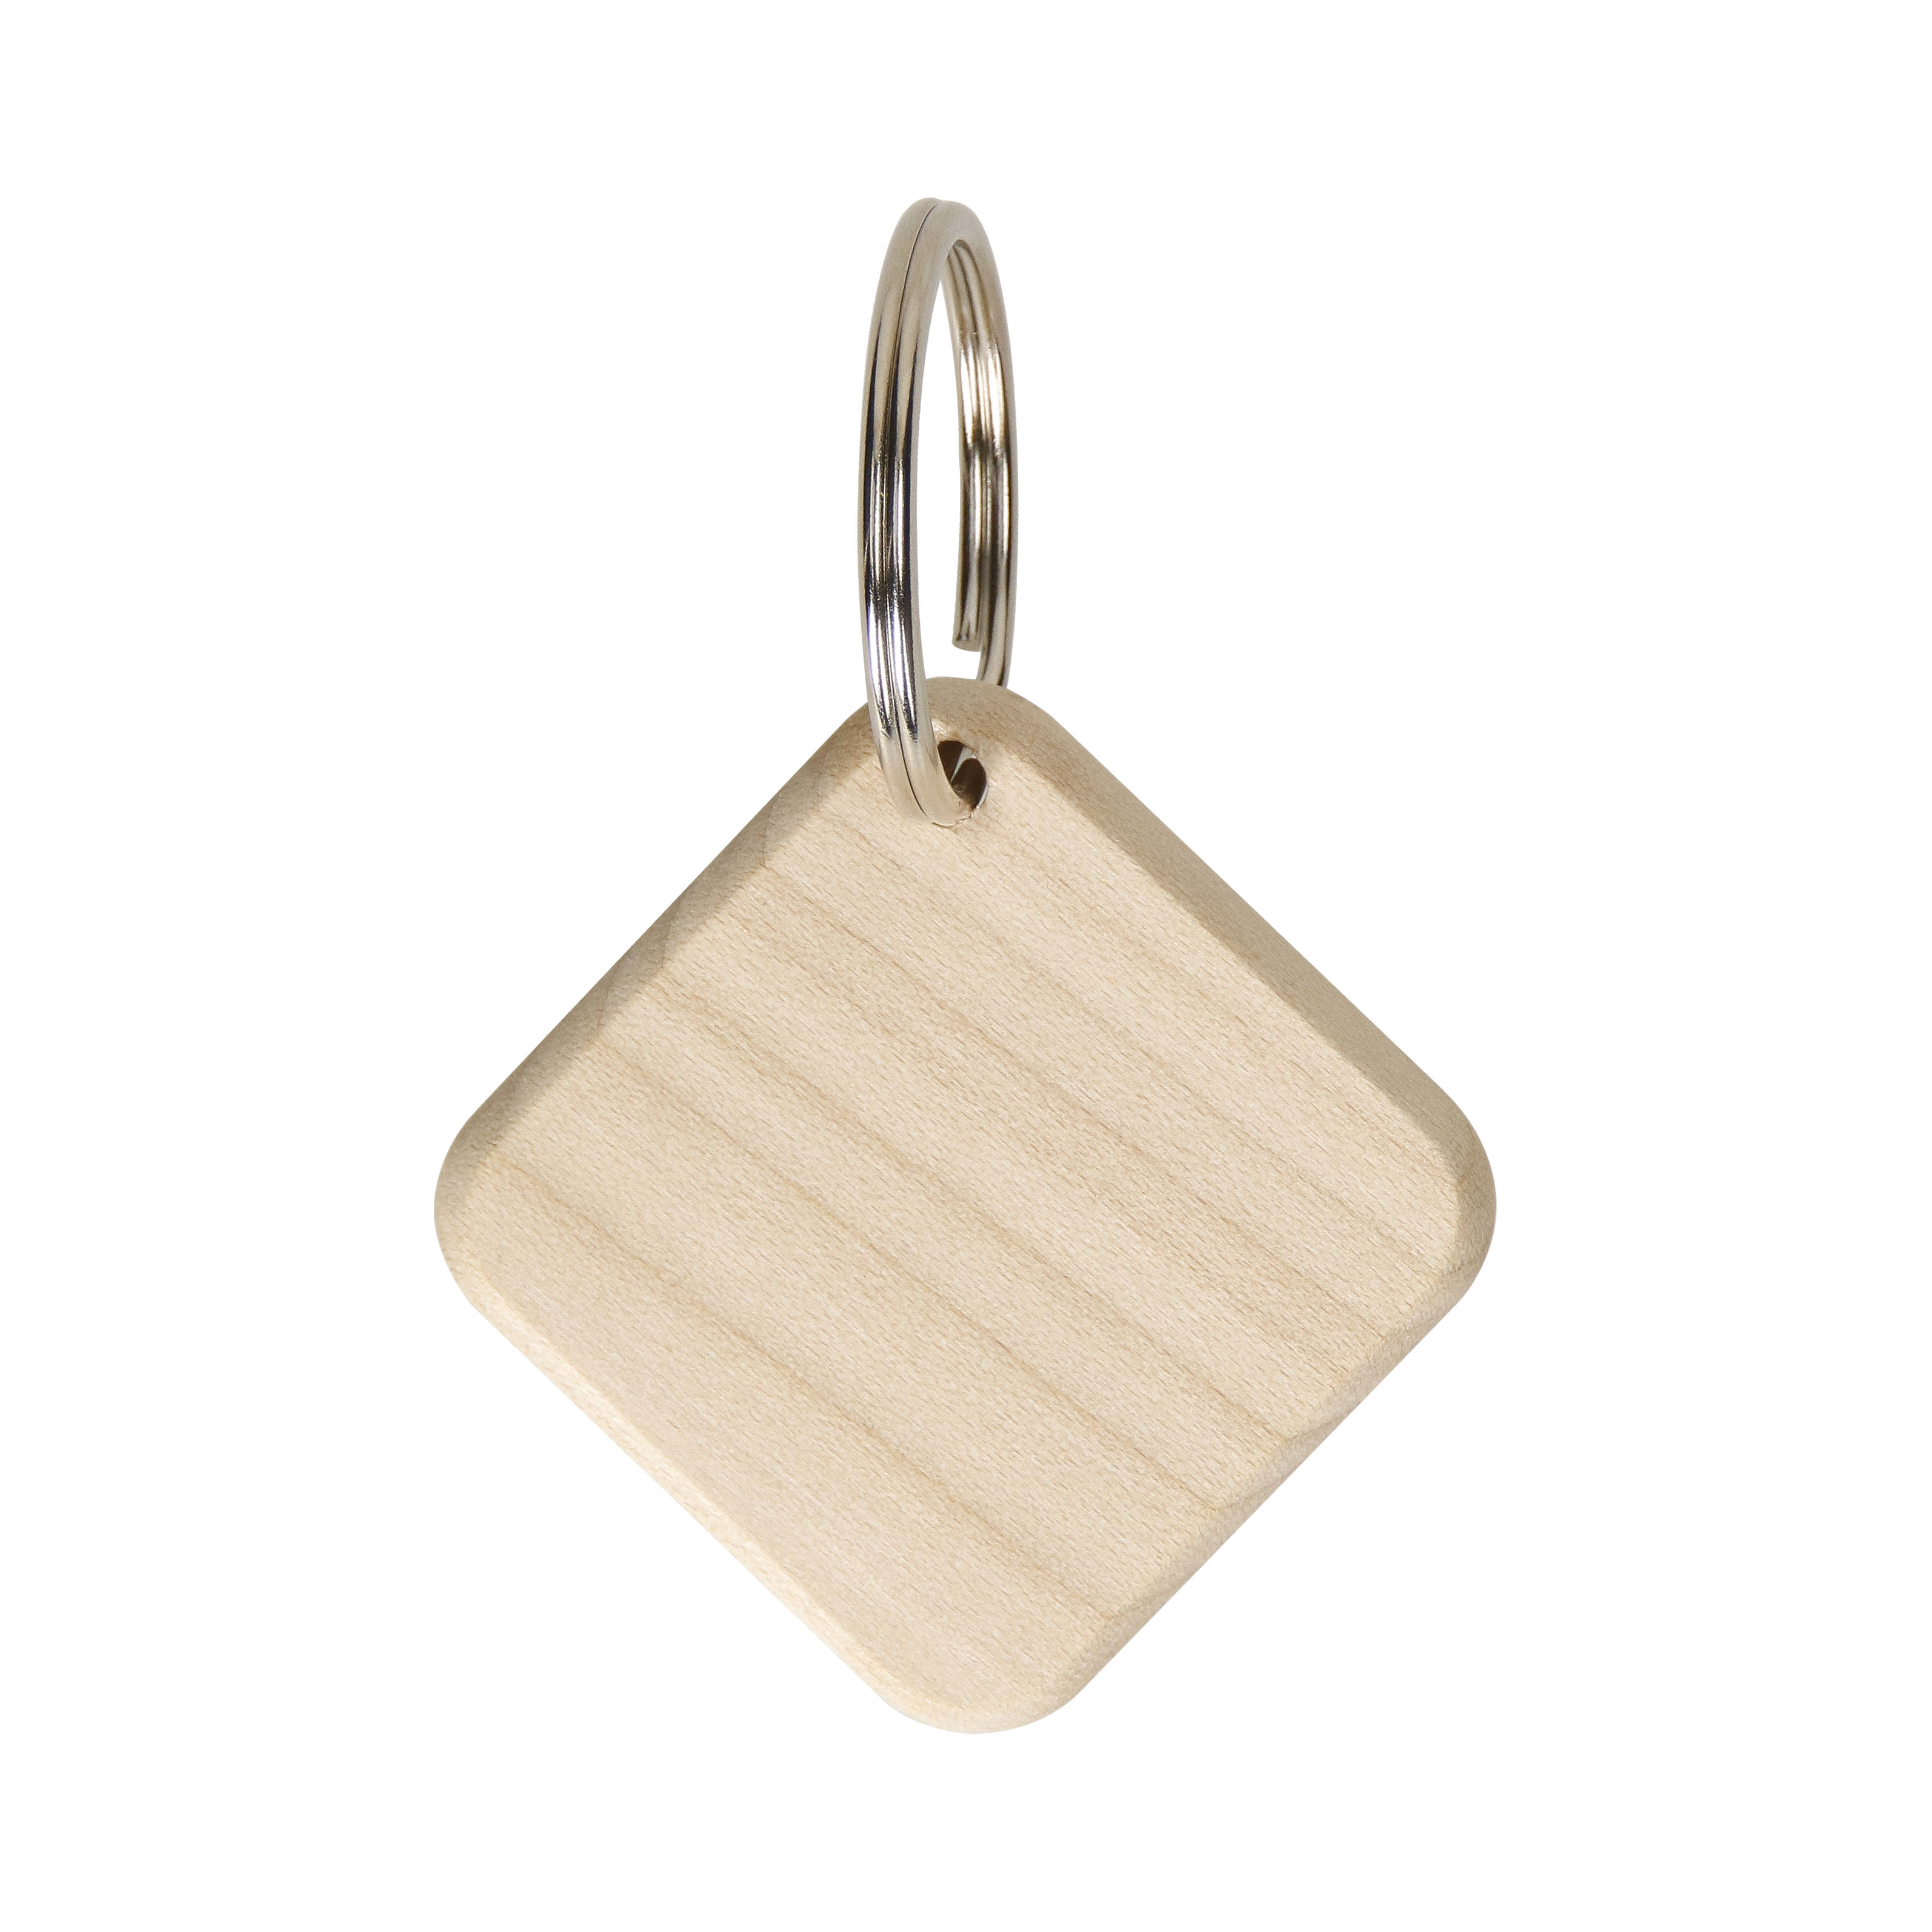 Square wooden key ring 